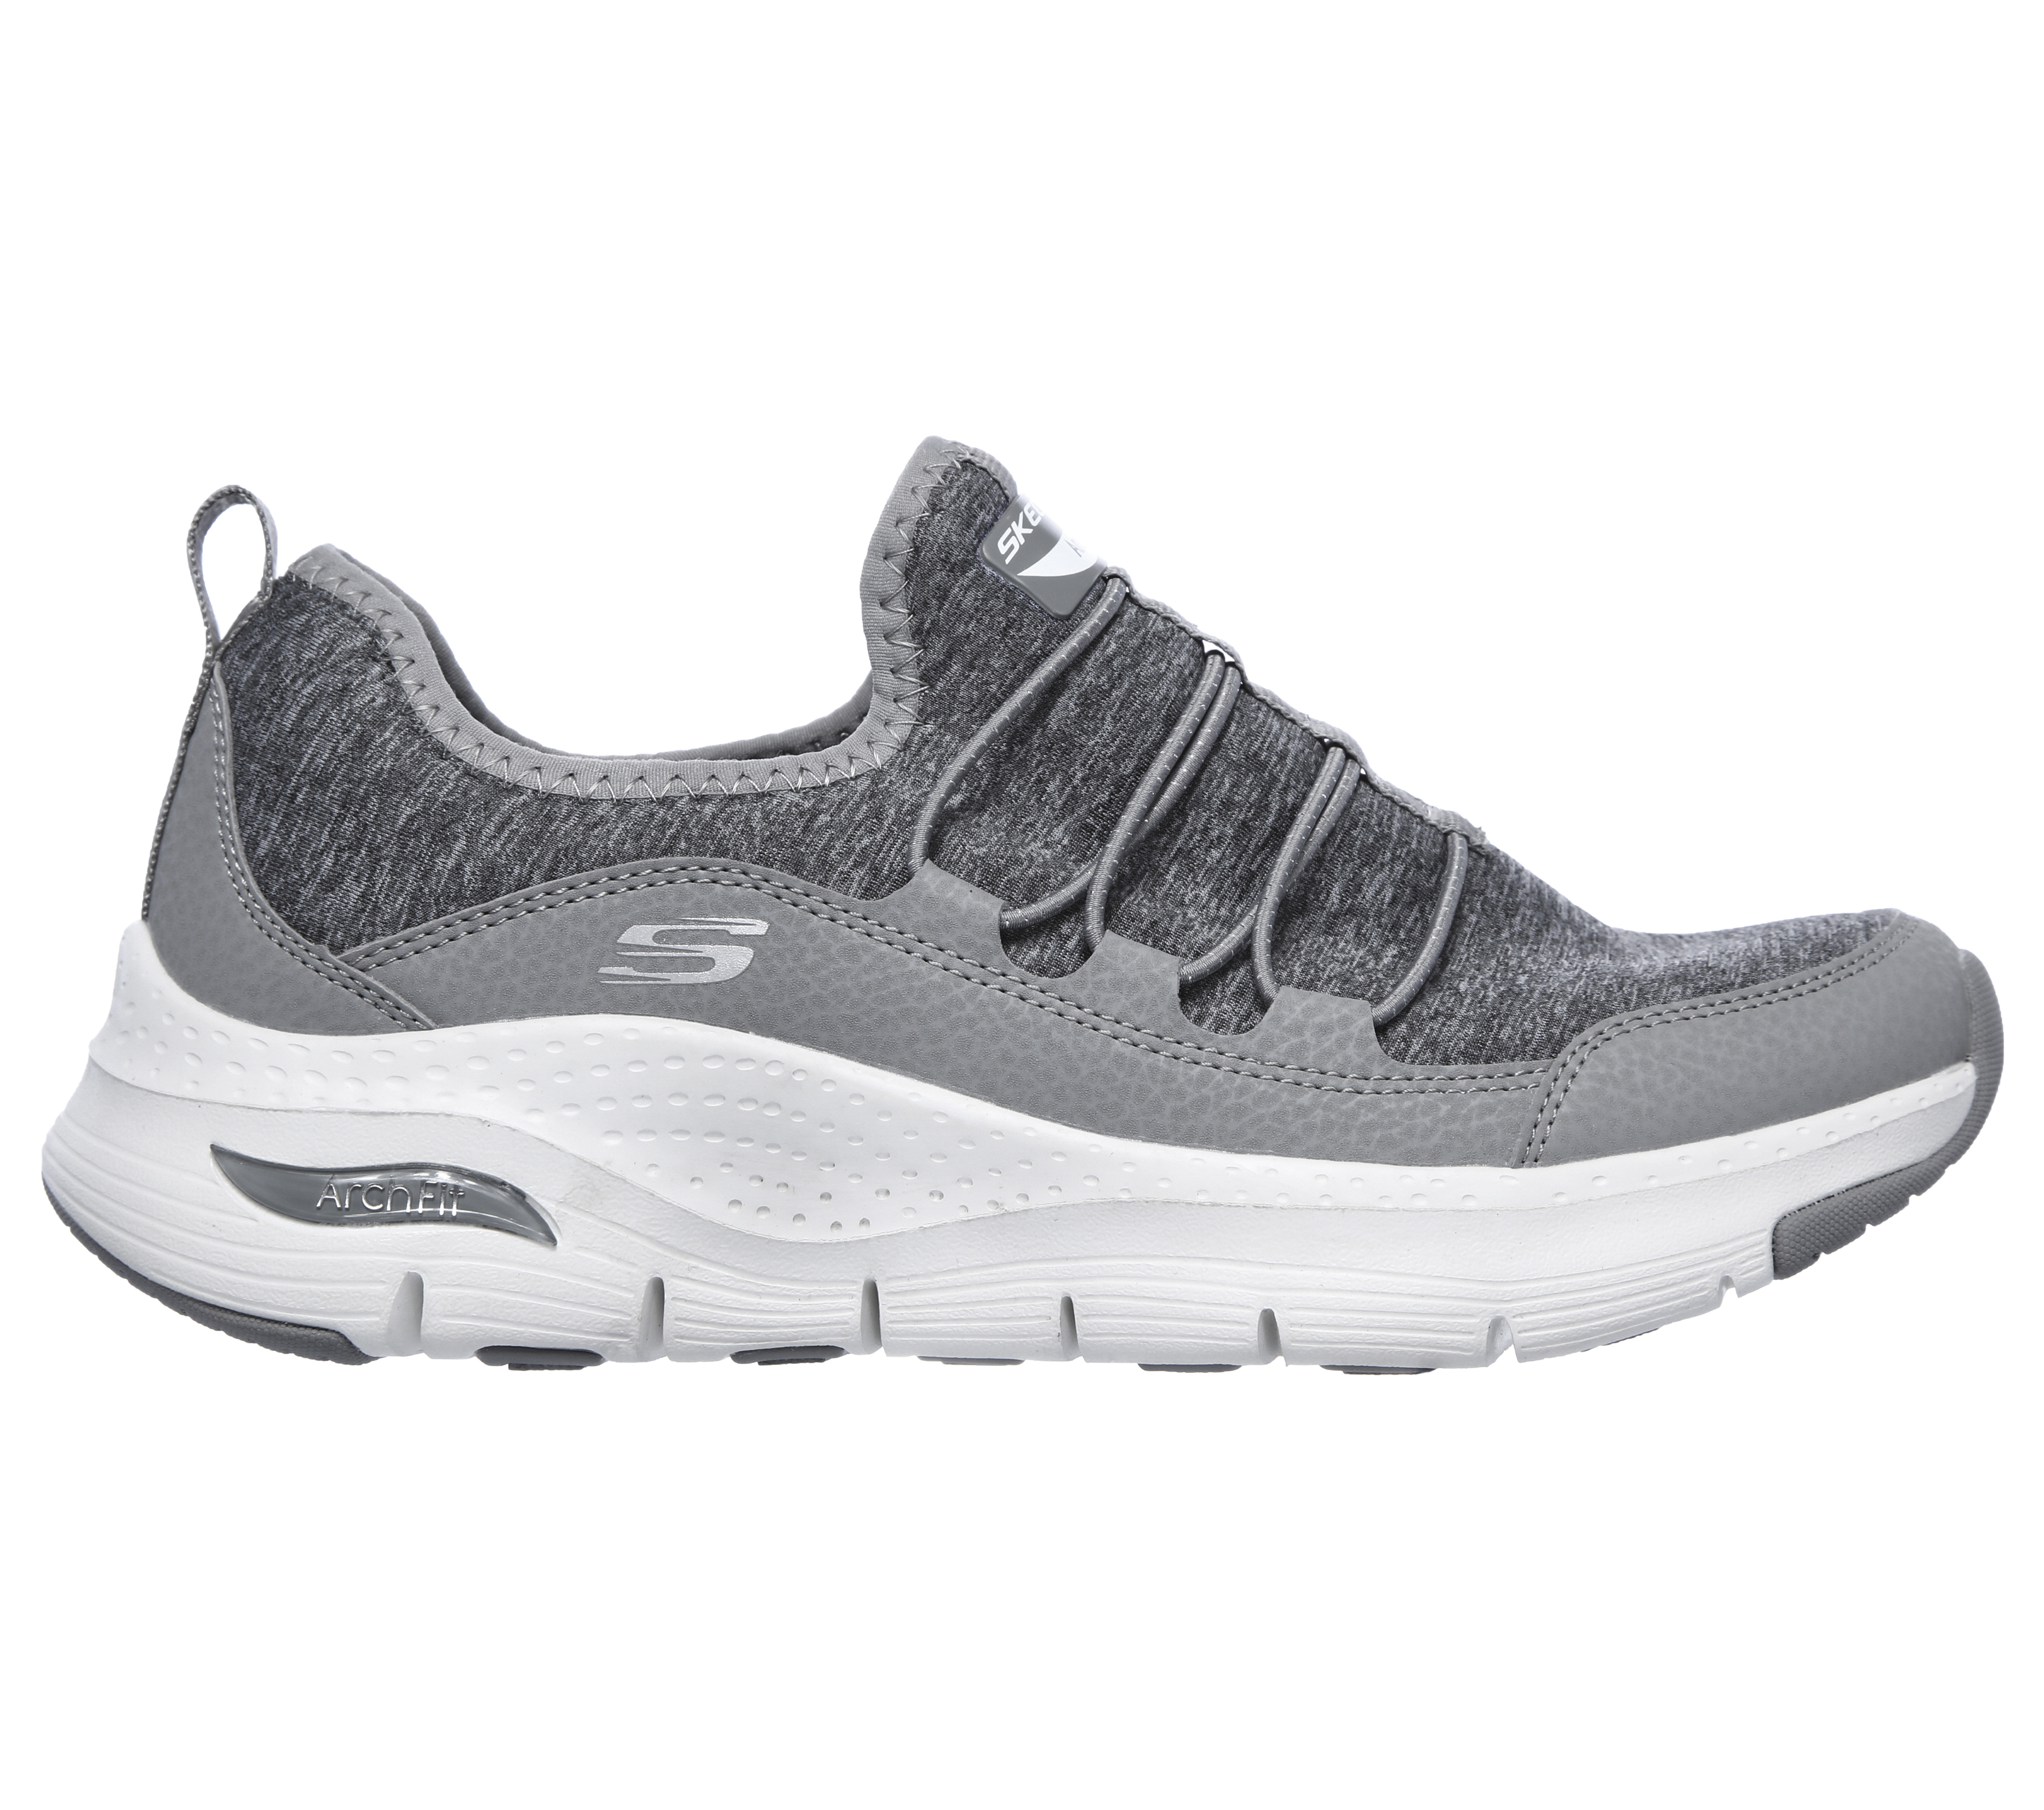 sports shoes with good arch support